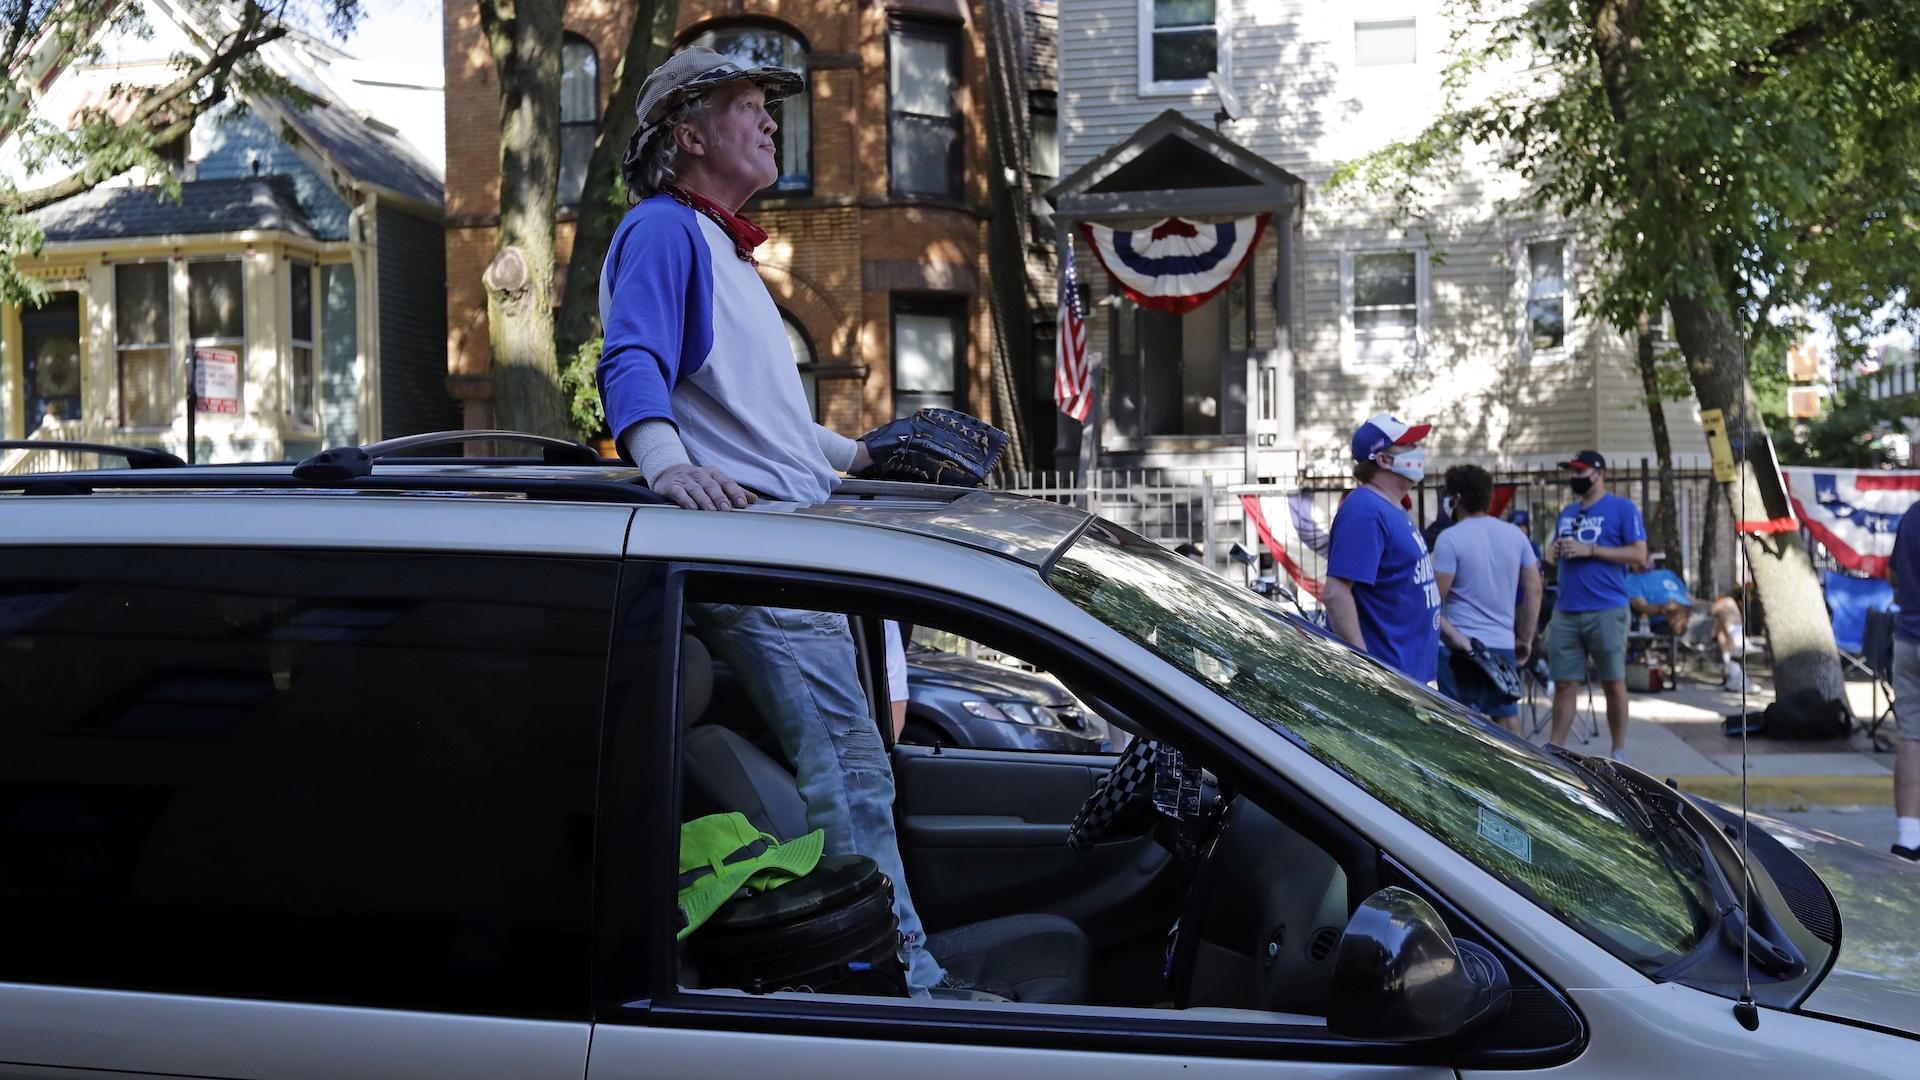 Chicago Cubs fans wait for a ball outside of Wrigley Field before the Opening Day baseball game between the Chicago Cubs and the Milwaukee Brewers in Chicago, Friday, July 24, 2020, in Chicago. (AP Photo / Nam Y. Huh)